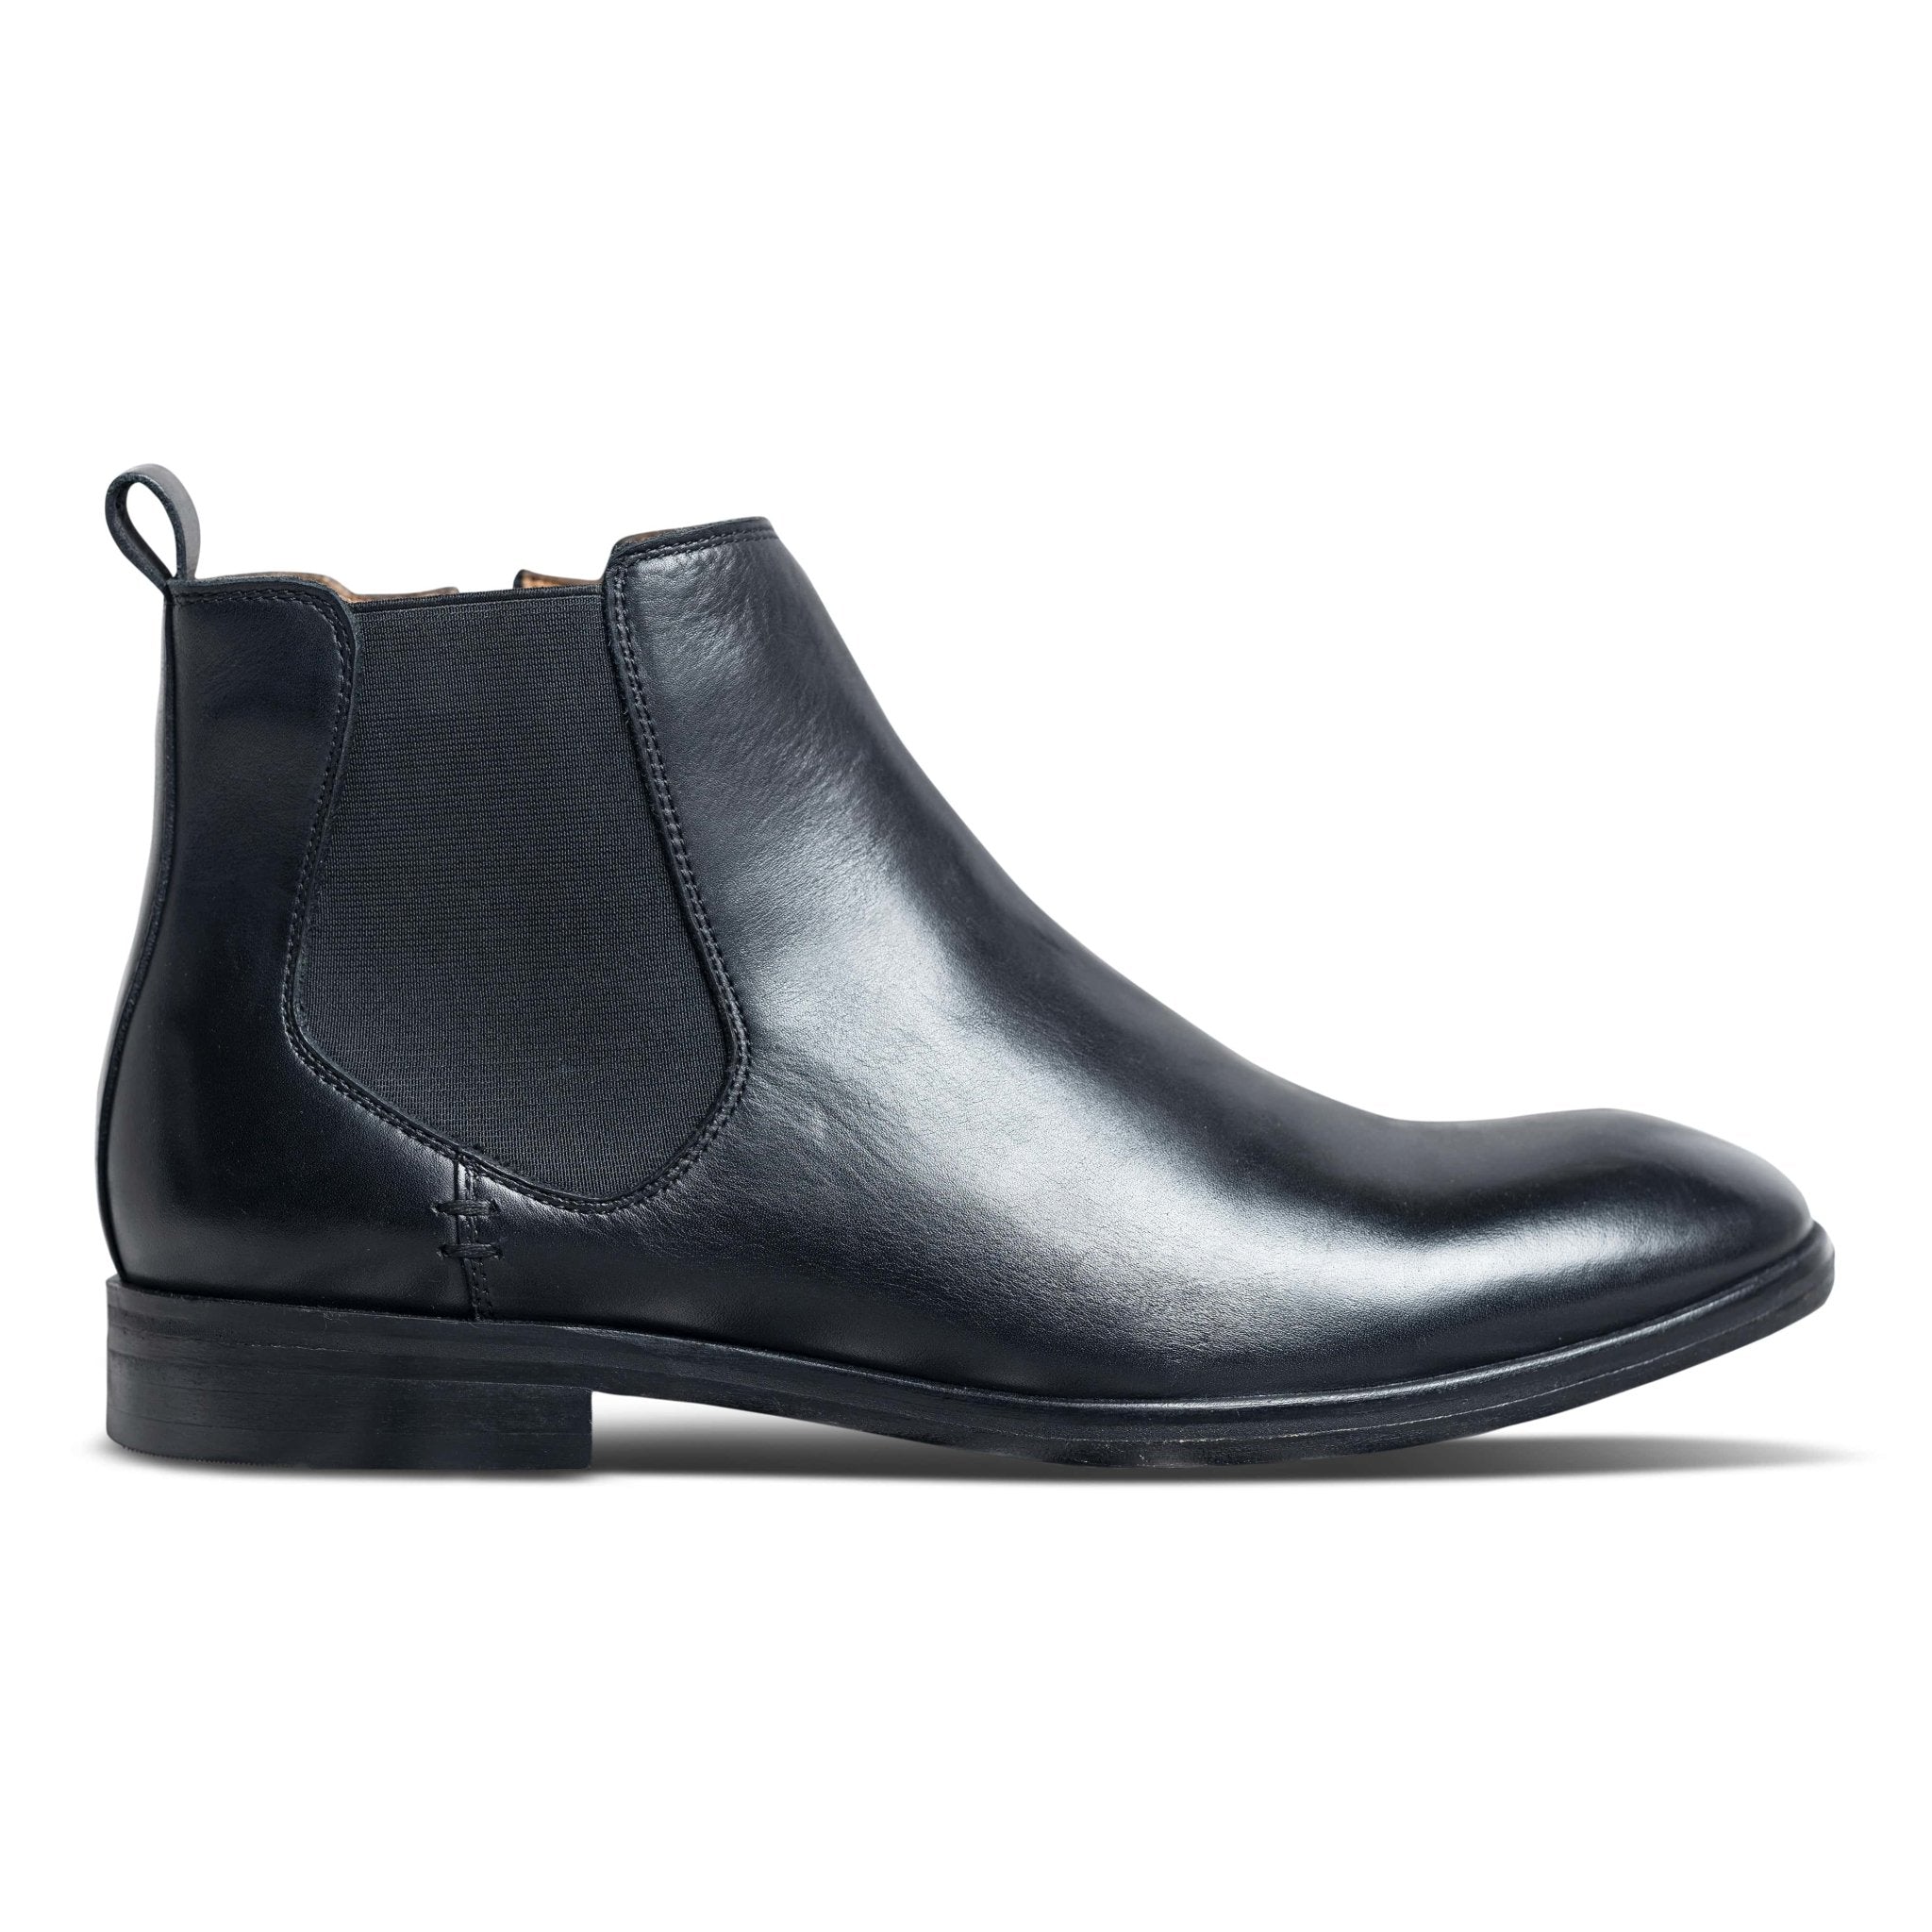 Chelsea Boots by dmodot